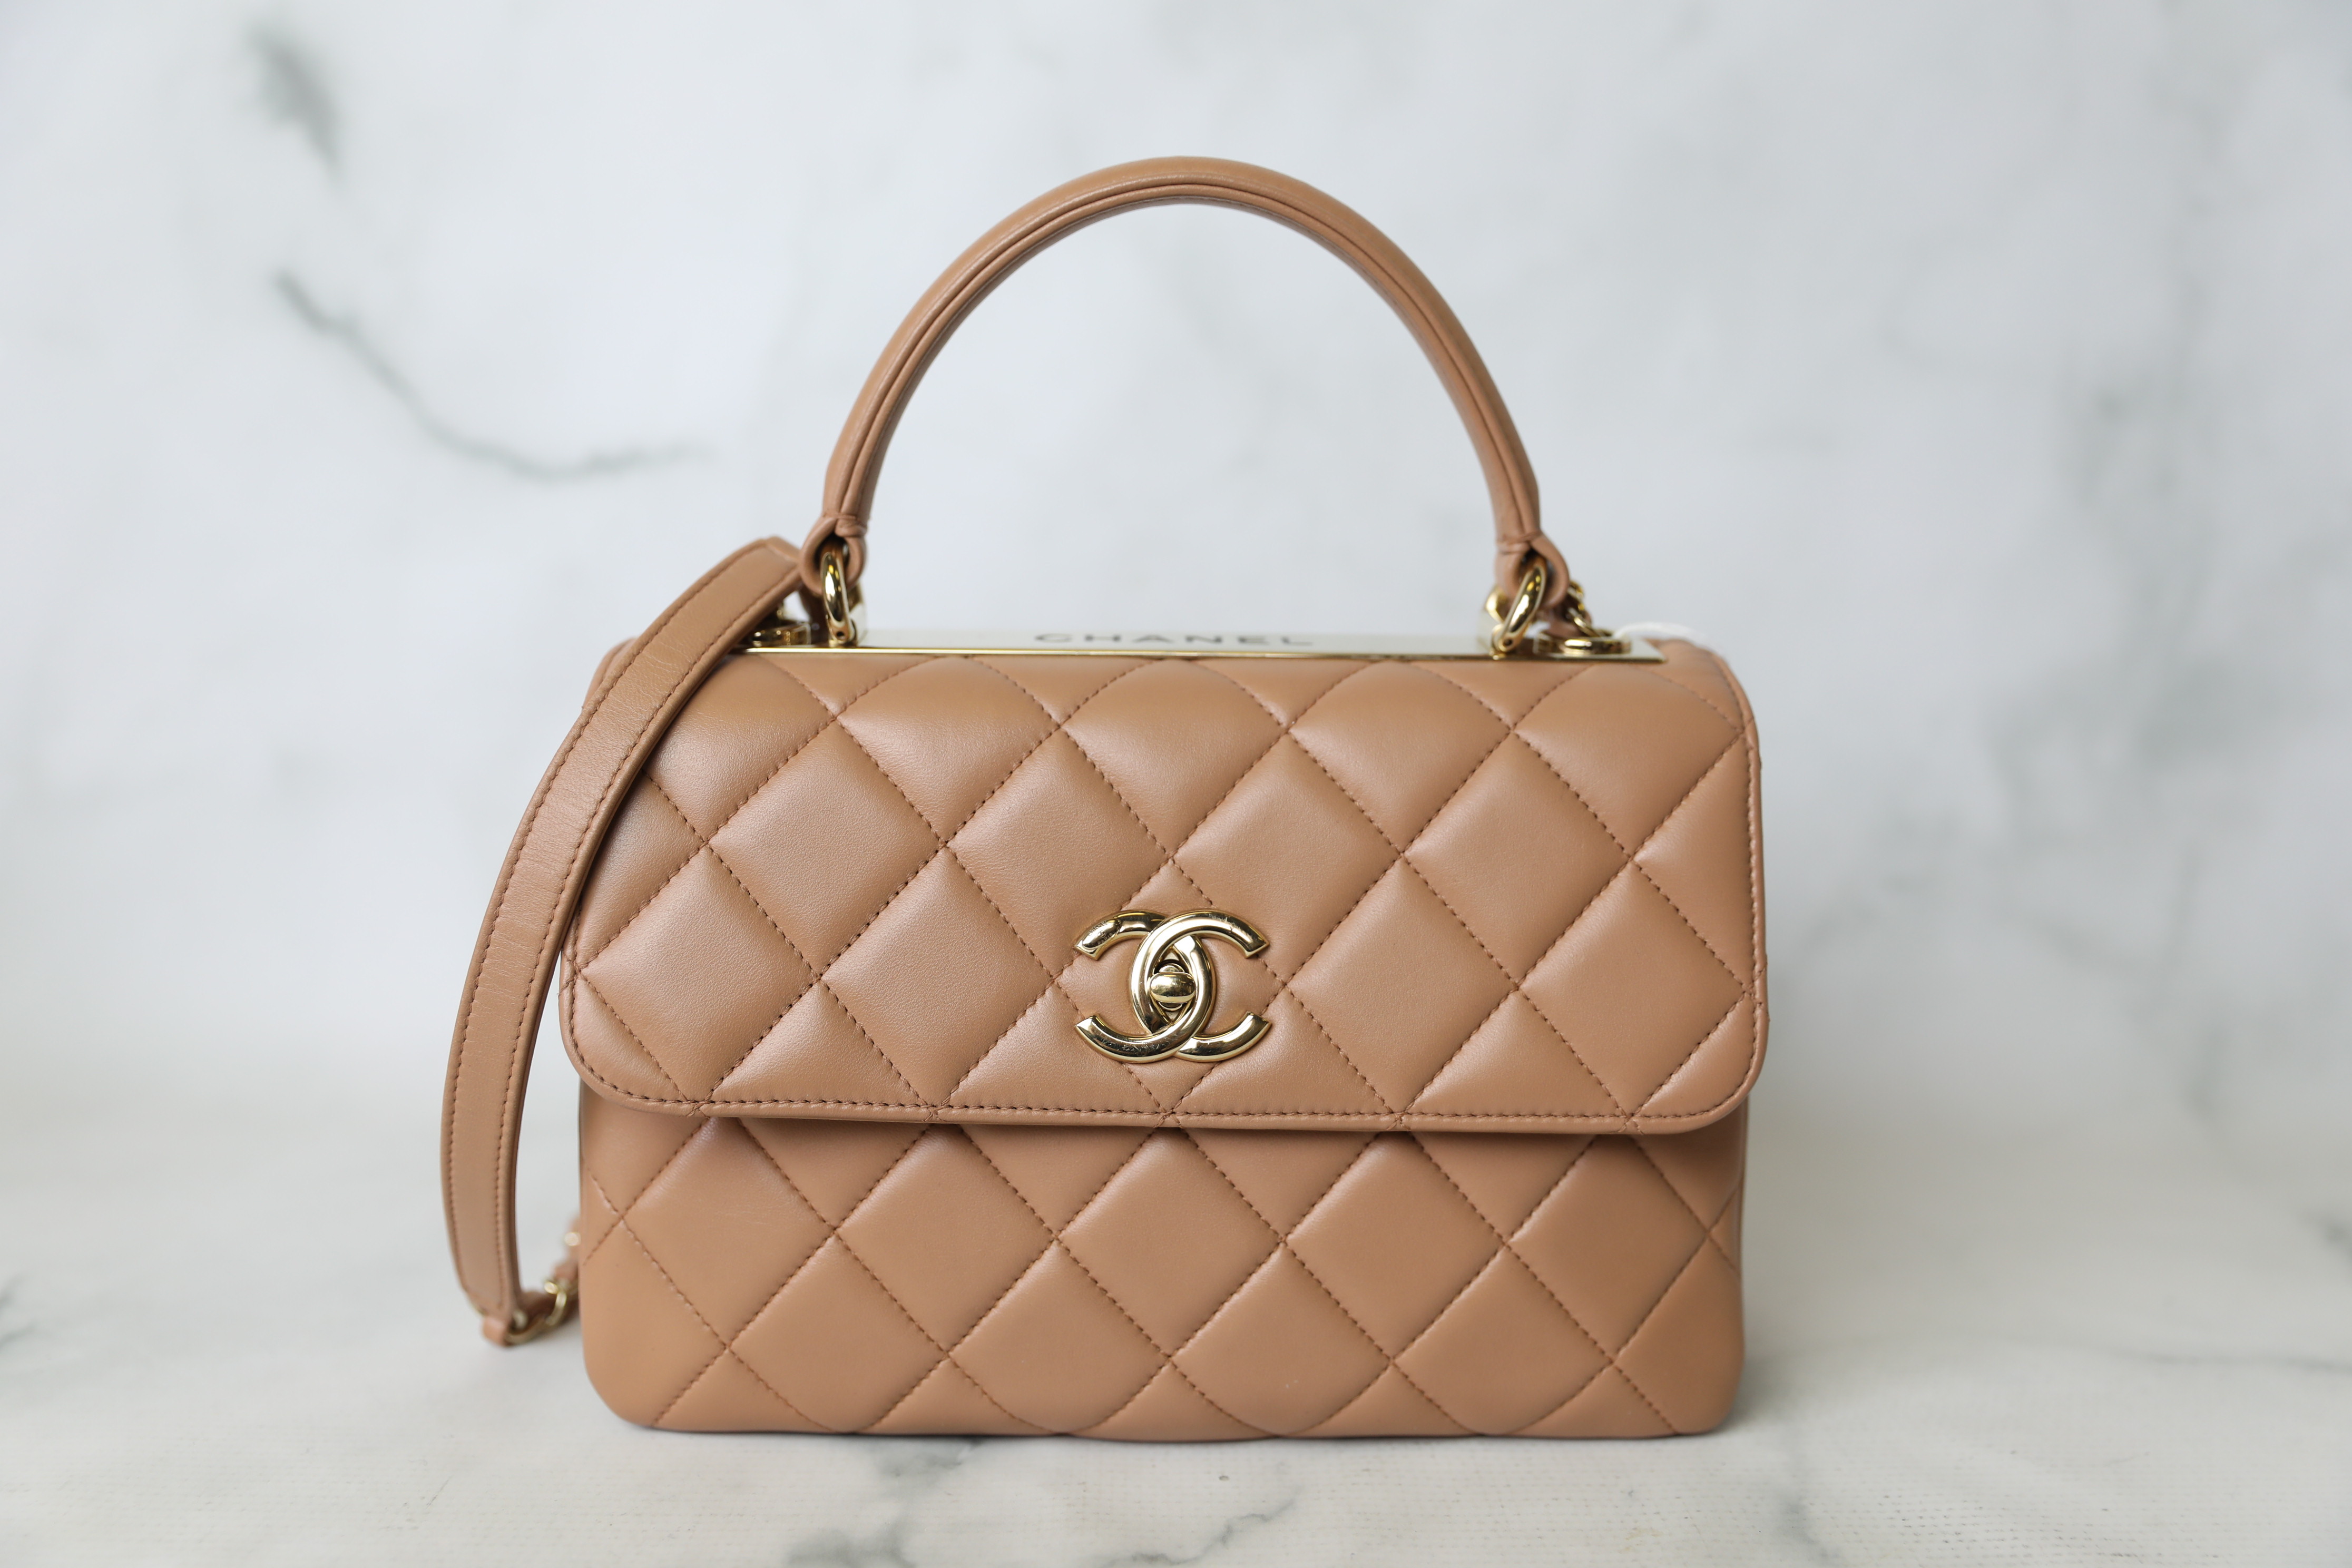 Chanel Trendy Small, Caramel Brown Lambskin with Gold Hardware